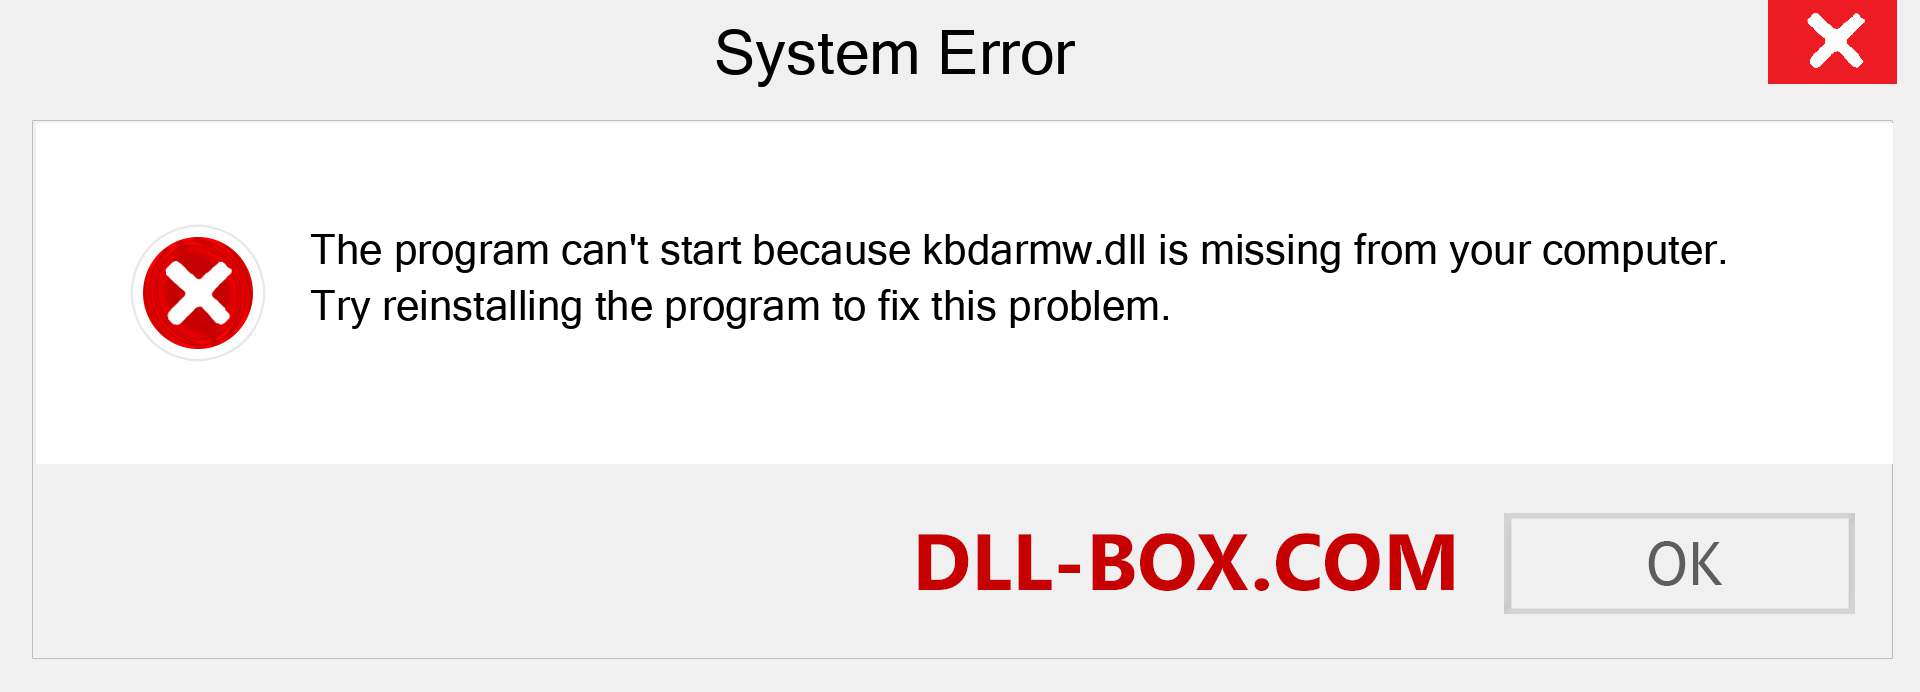  kbdarmw.dll file is missing?. Download for Windows 7, 8, 10 - Fix  kbdarmw dll Missing Error on Windows, photos, images